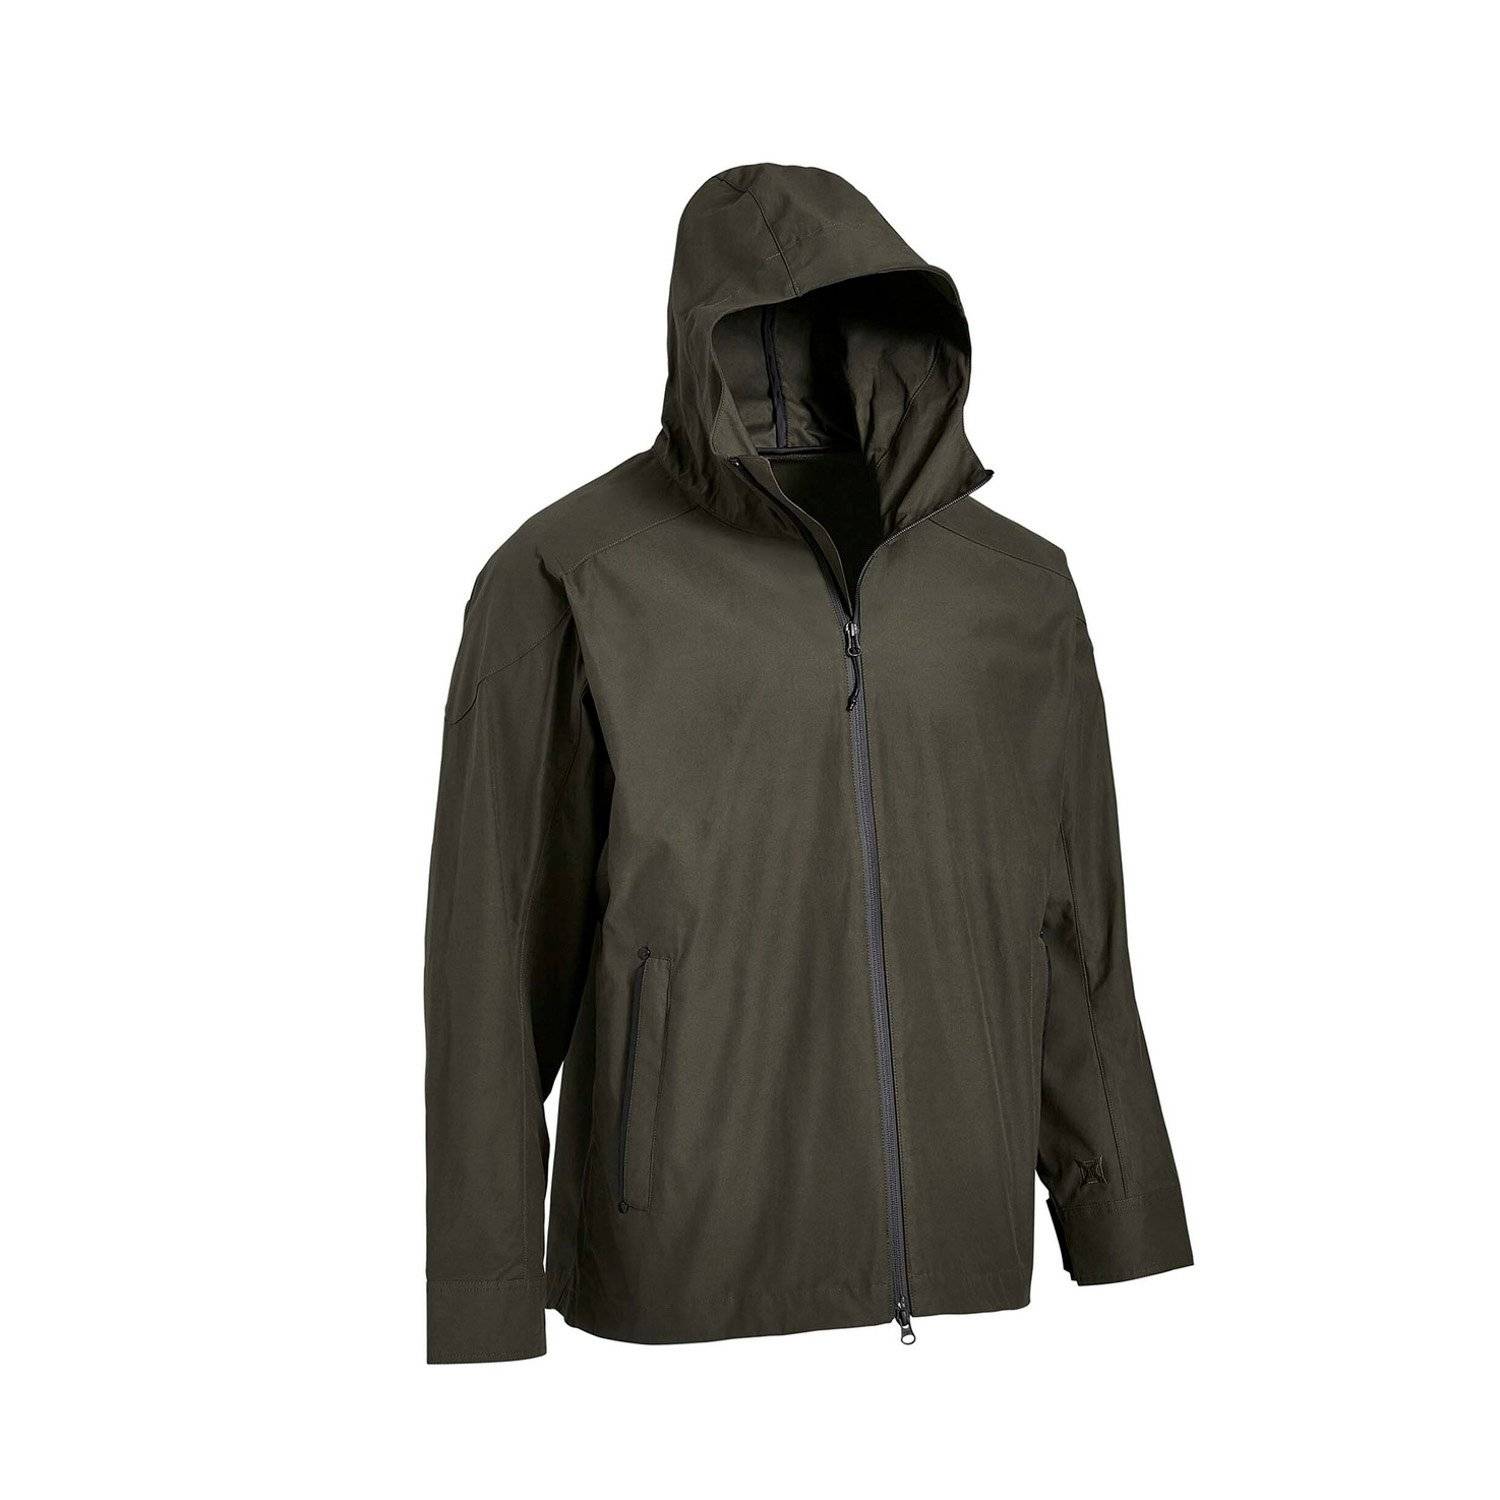 Vertx UD2 Tactical Jacket | Concealed Carry Clothing